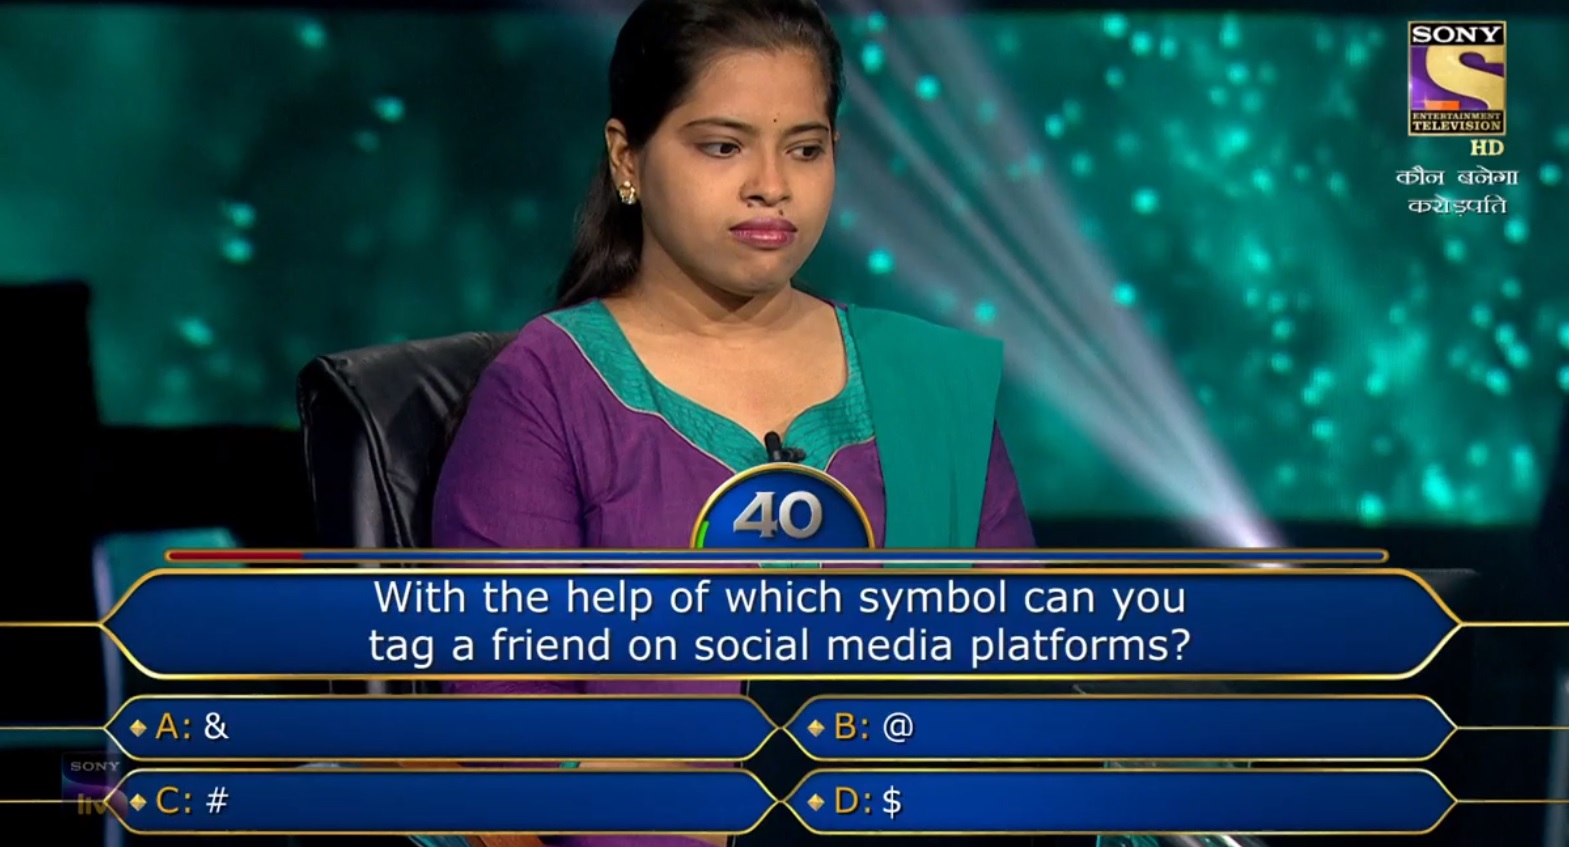 Ques : With the help of which symbol can you tag a friend on social media platforms?